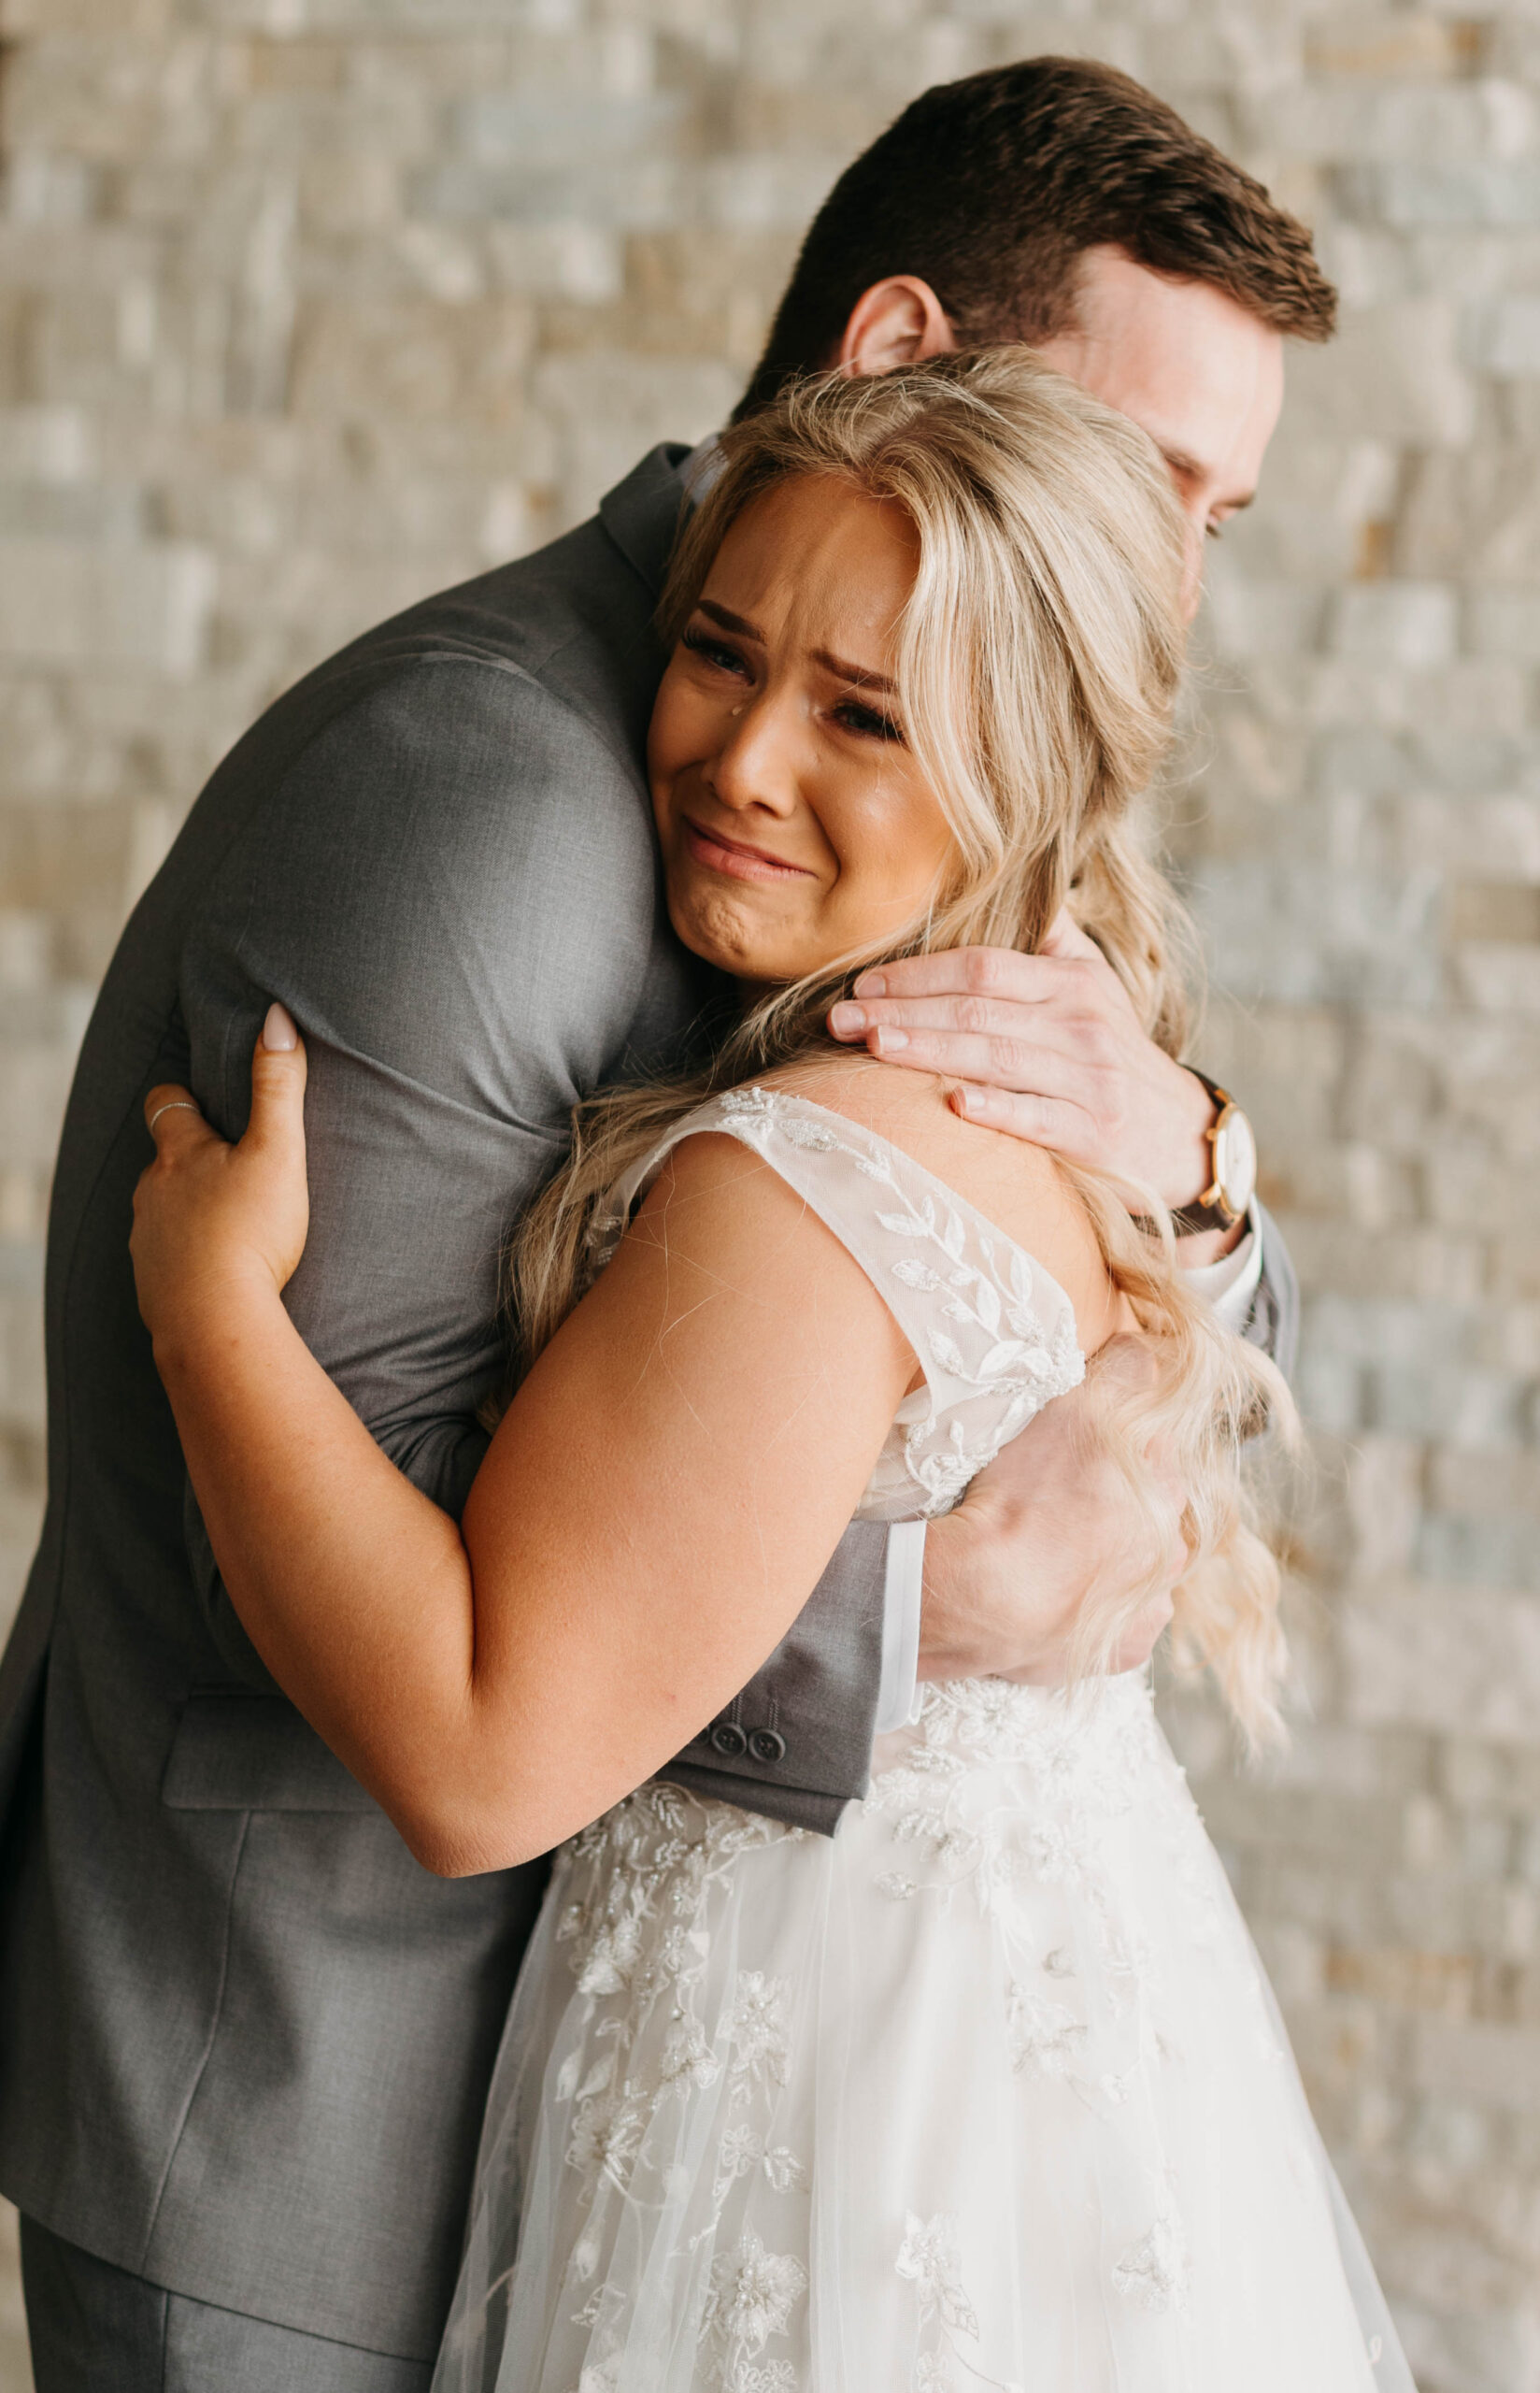 Couple crying and hugging on their wedding day. Emotional wedding photographs. 